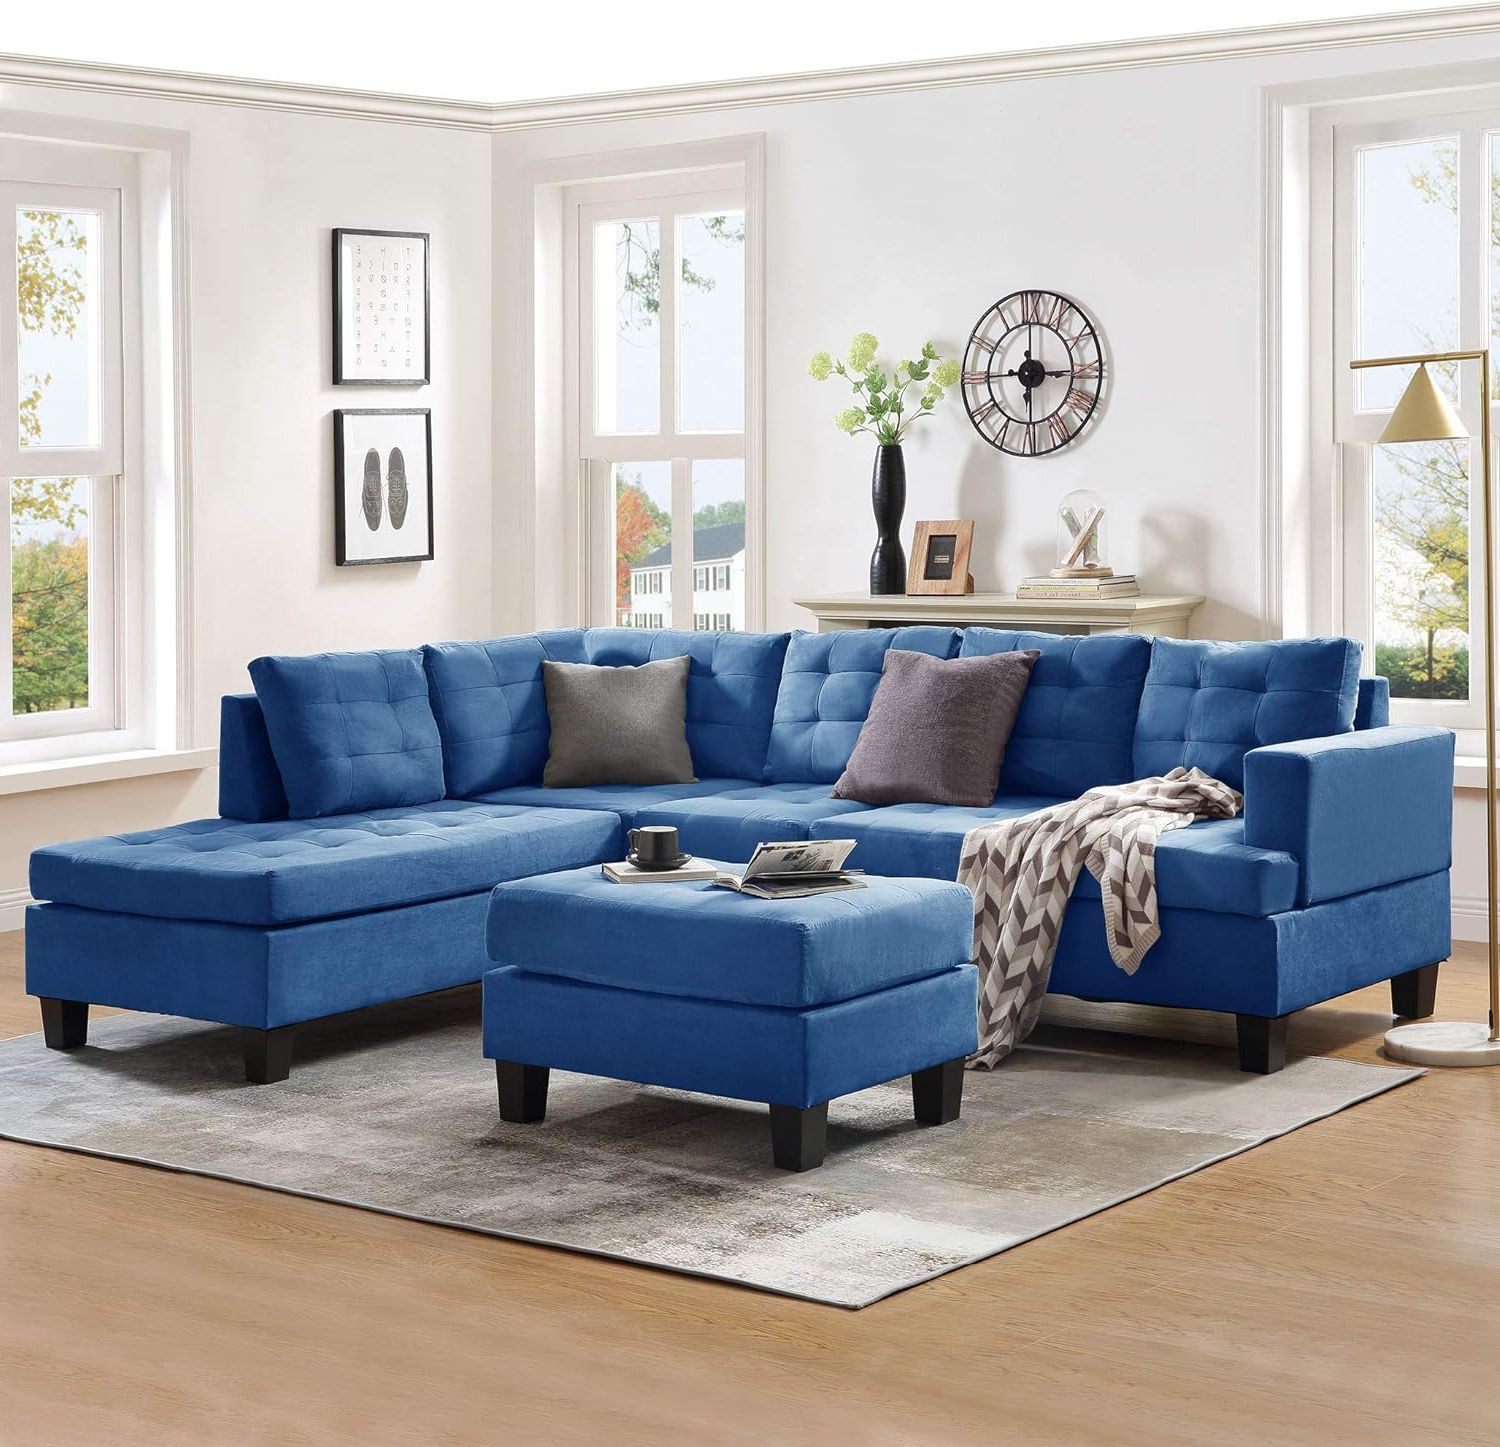 Favorite Amazon: Merax Sofa 3 Piece Sectional Sofa With Chaise And Ottoman Inside Sofas With Ottomans (View 4 of 15)